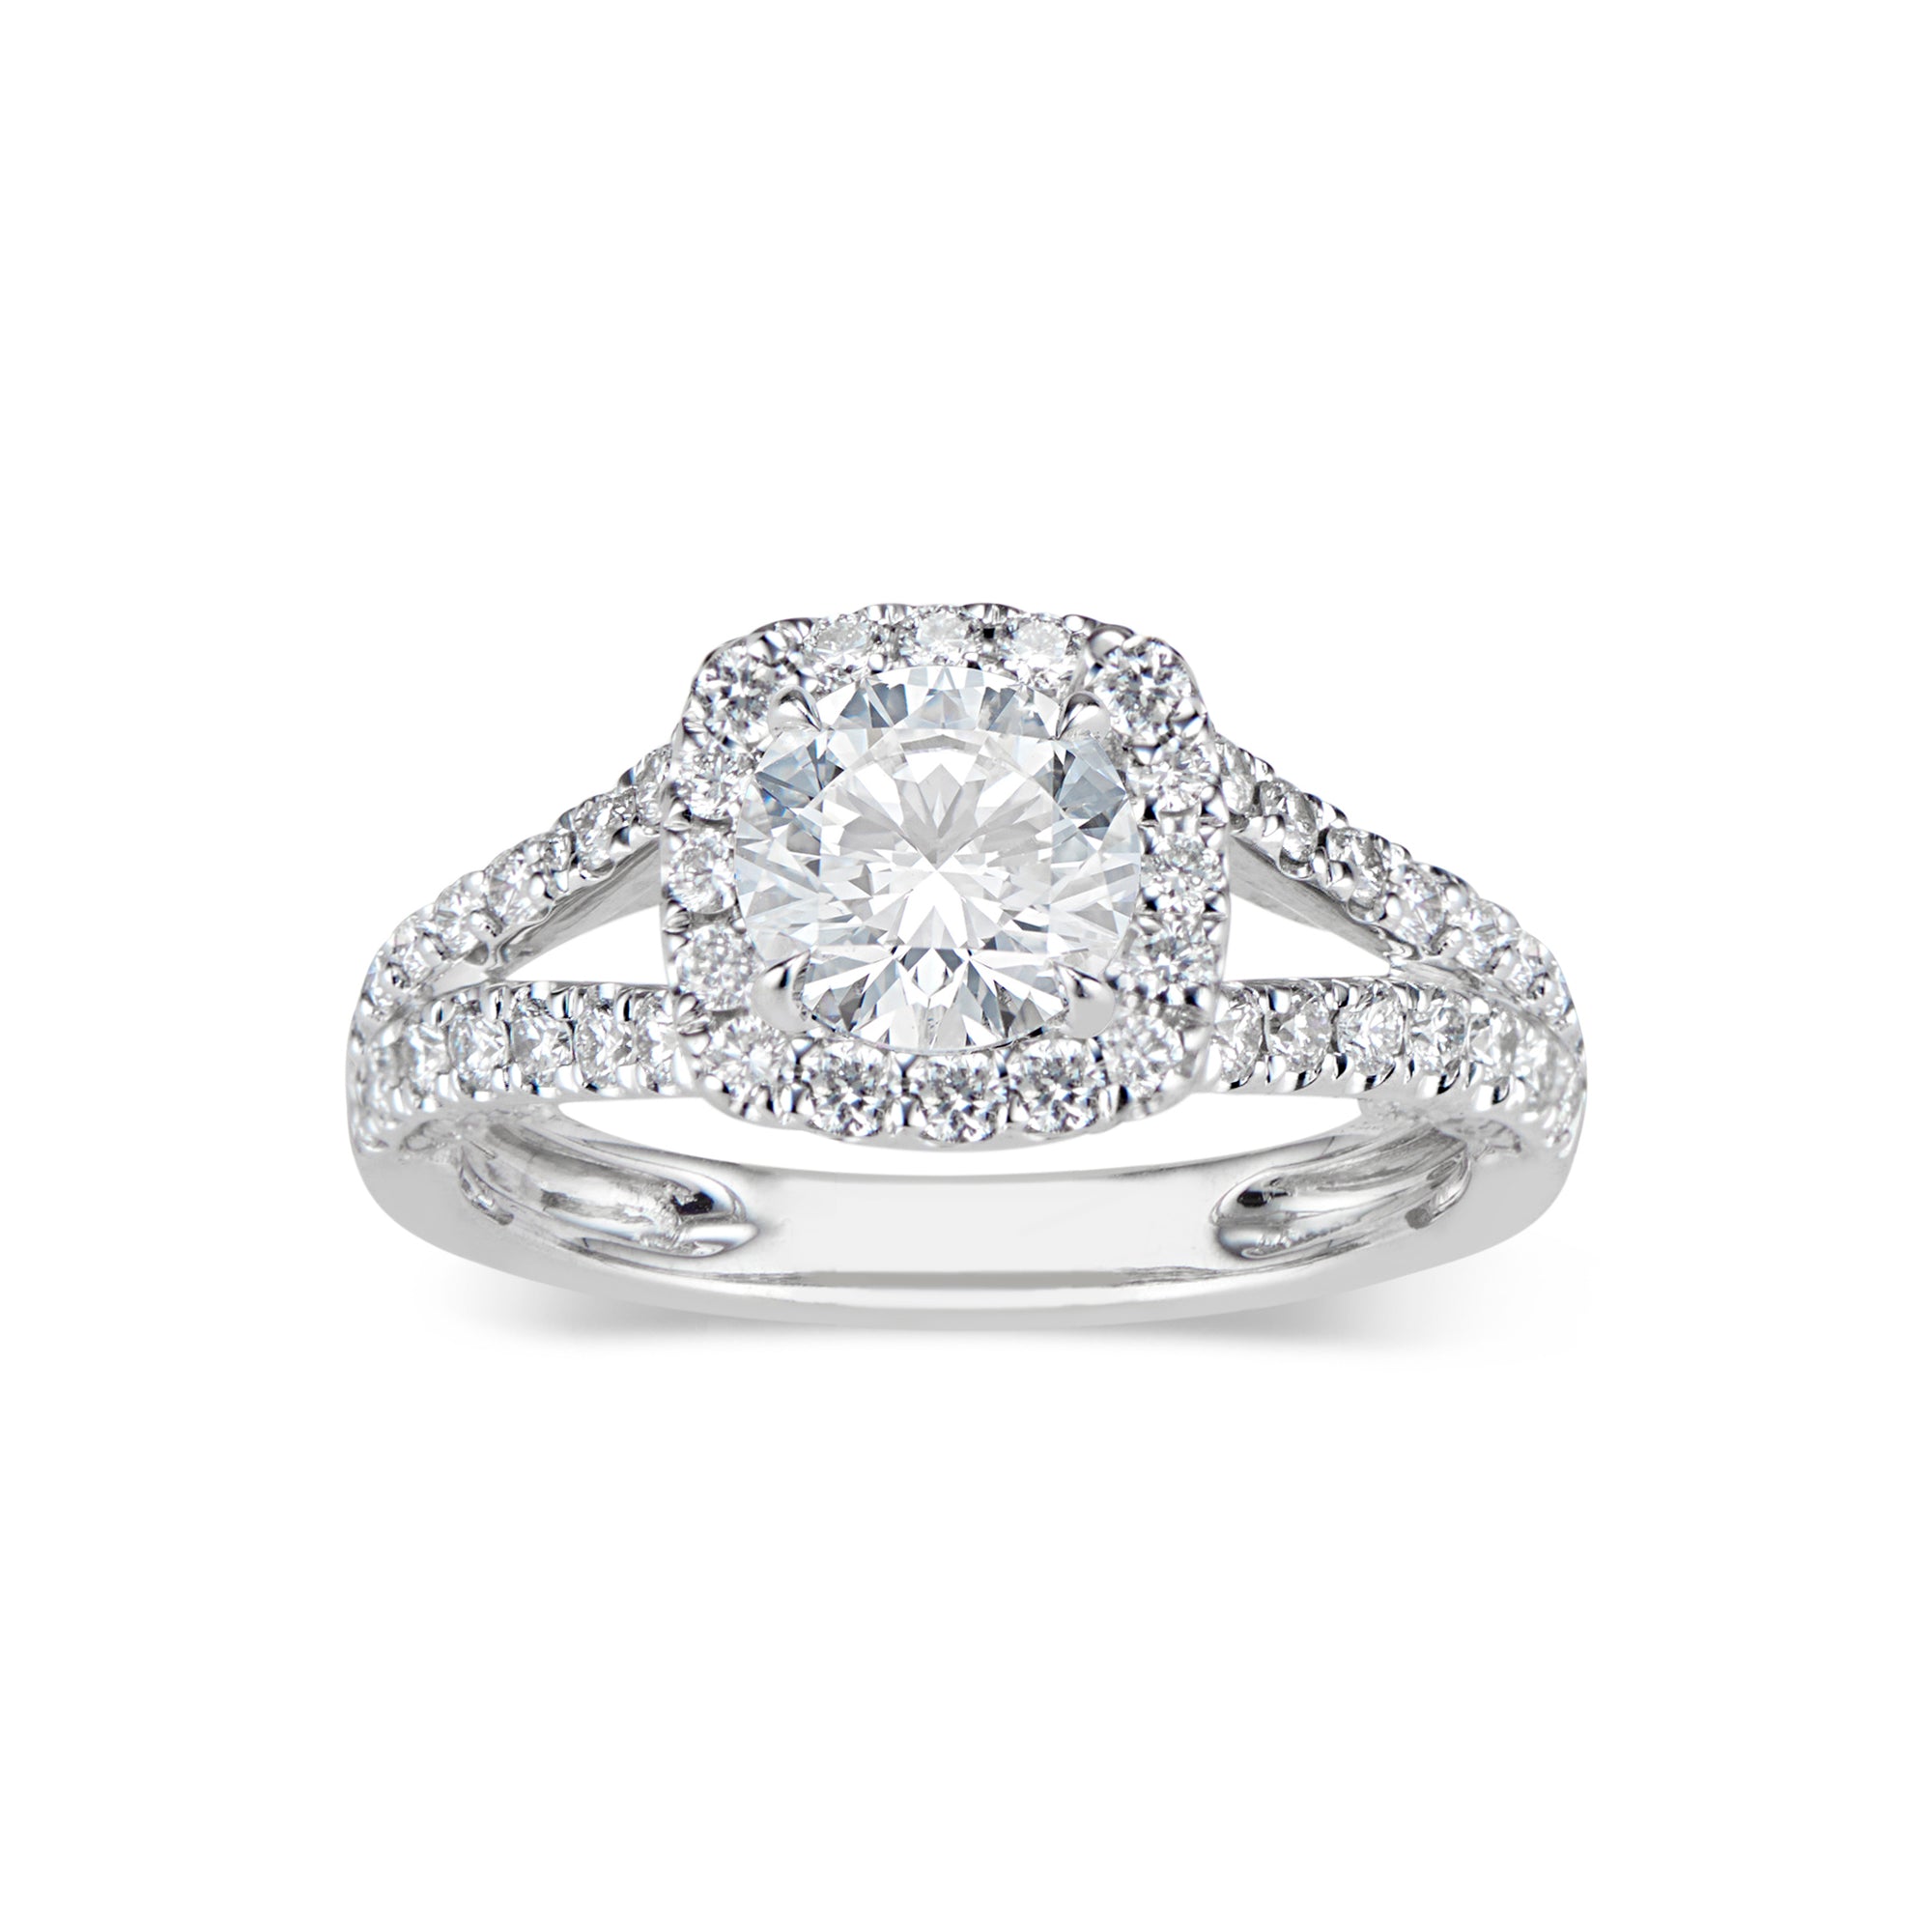 Cushion Halo Diamond Engagement Ring with Split Shank  -18K Weighting 5.28 GR  - 58 round diamonds totaling 0.88 carats